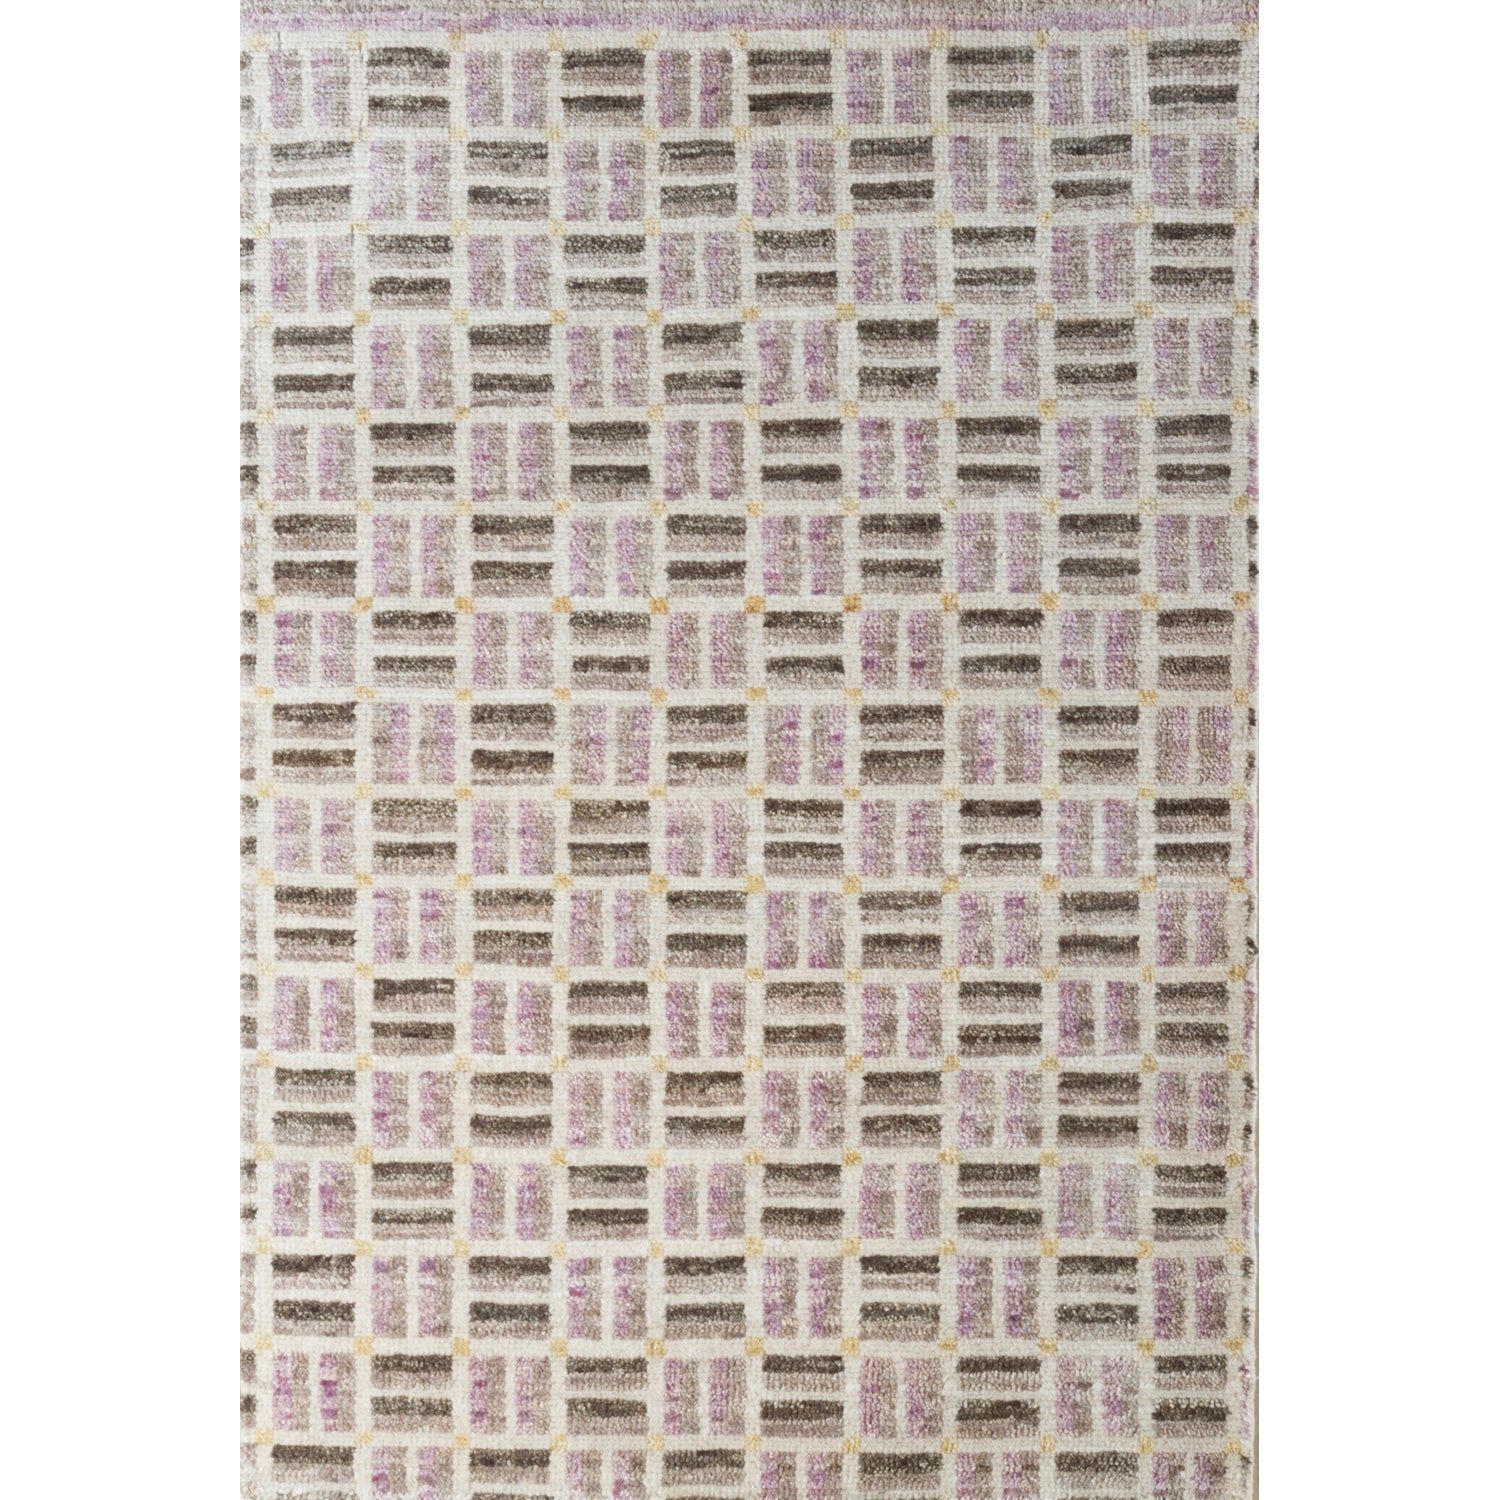 Rectangular high-pile rug in a small-scale square crosshatch design in shades of purple, olive, brown and cream.